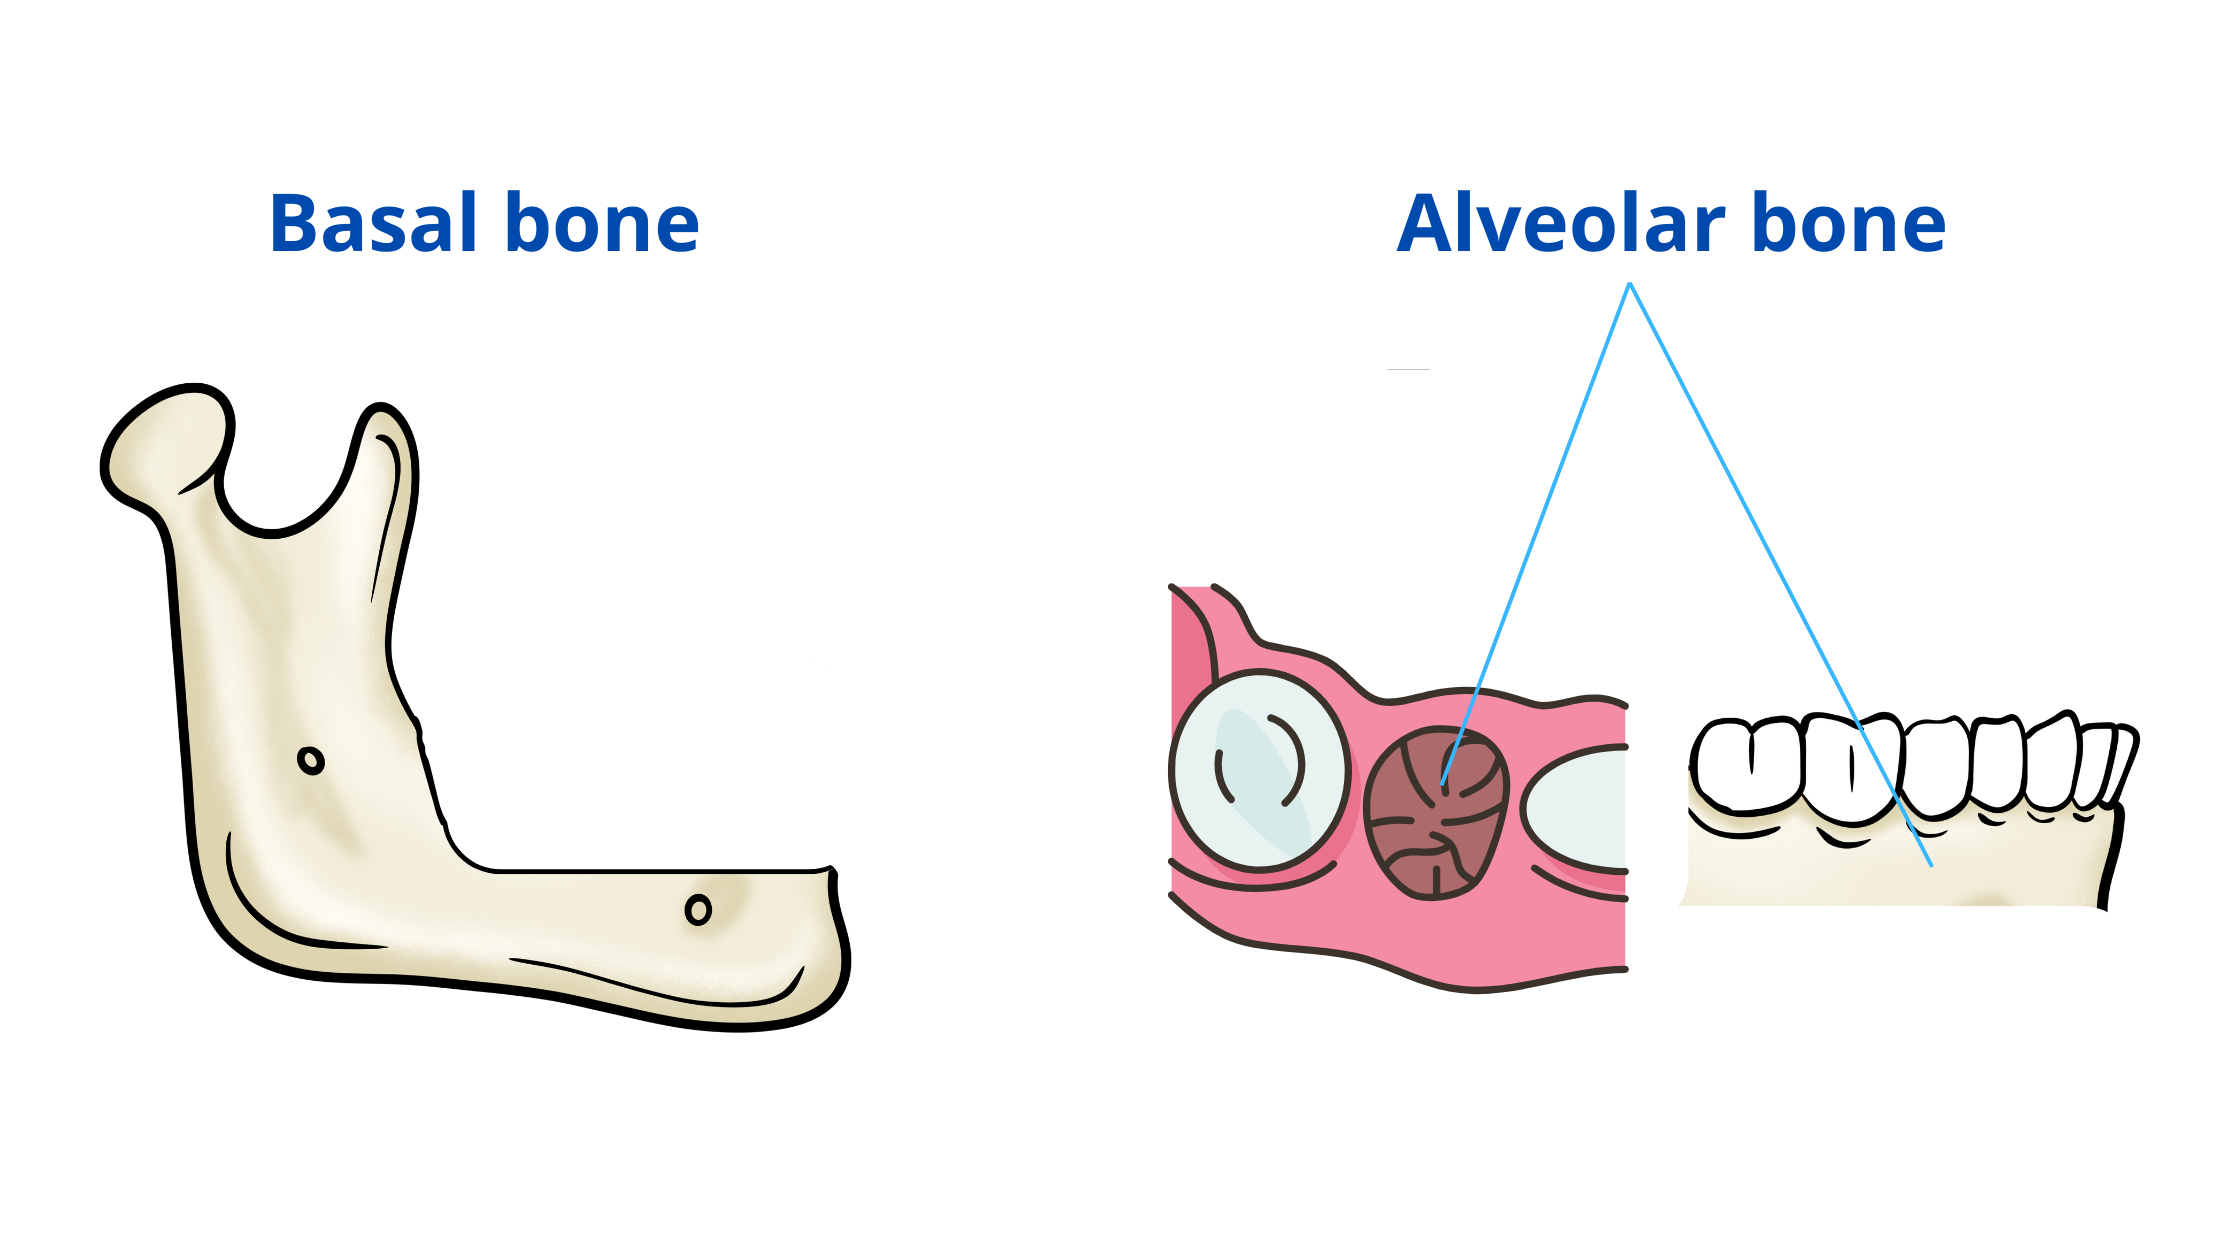 the difference between the basal bone and alveolar bone